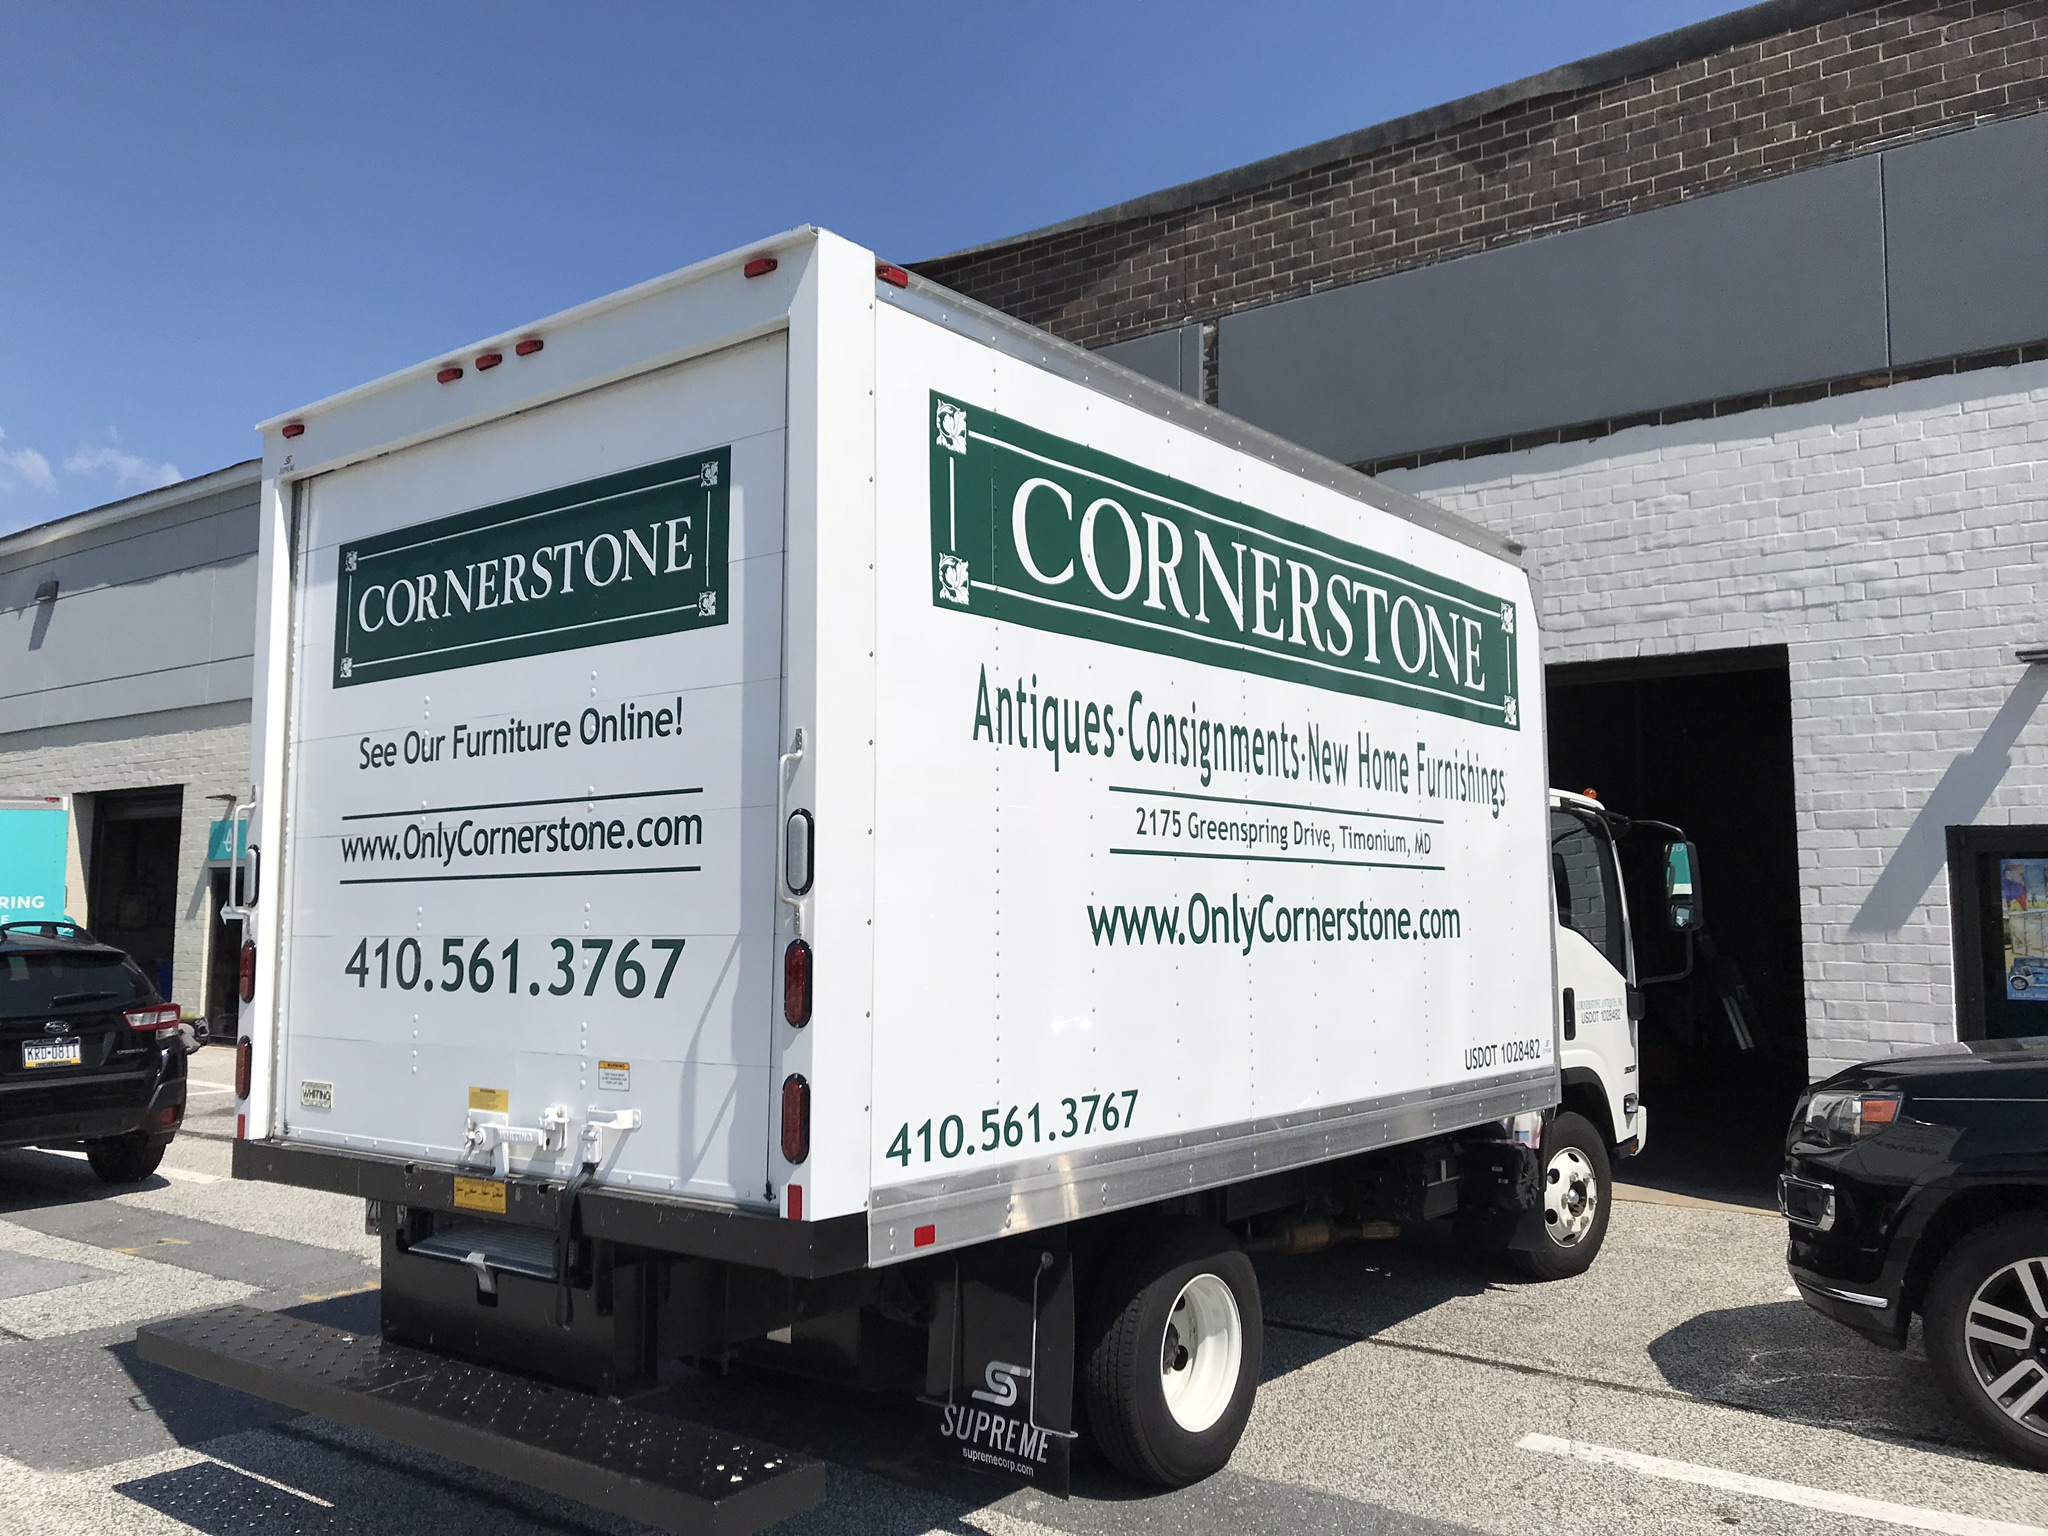 Vehicle decals for Cornerstone Antiques, Consignments, and New Home Furnishings 